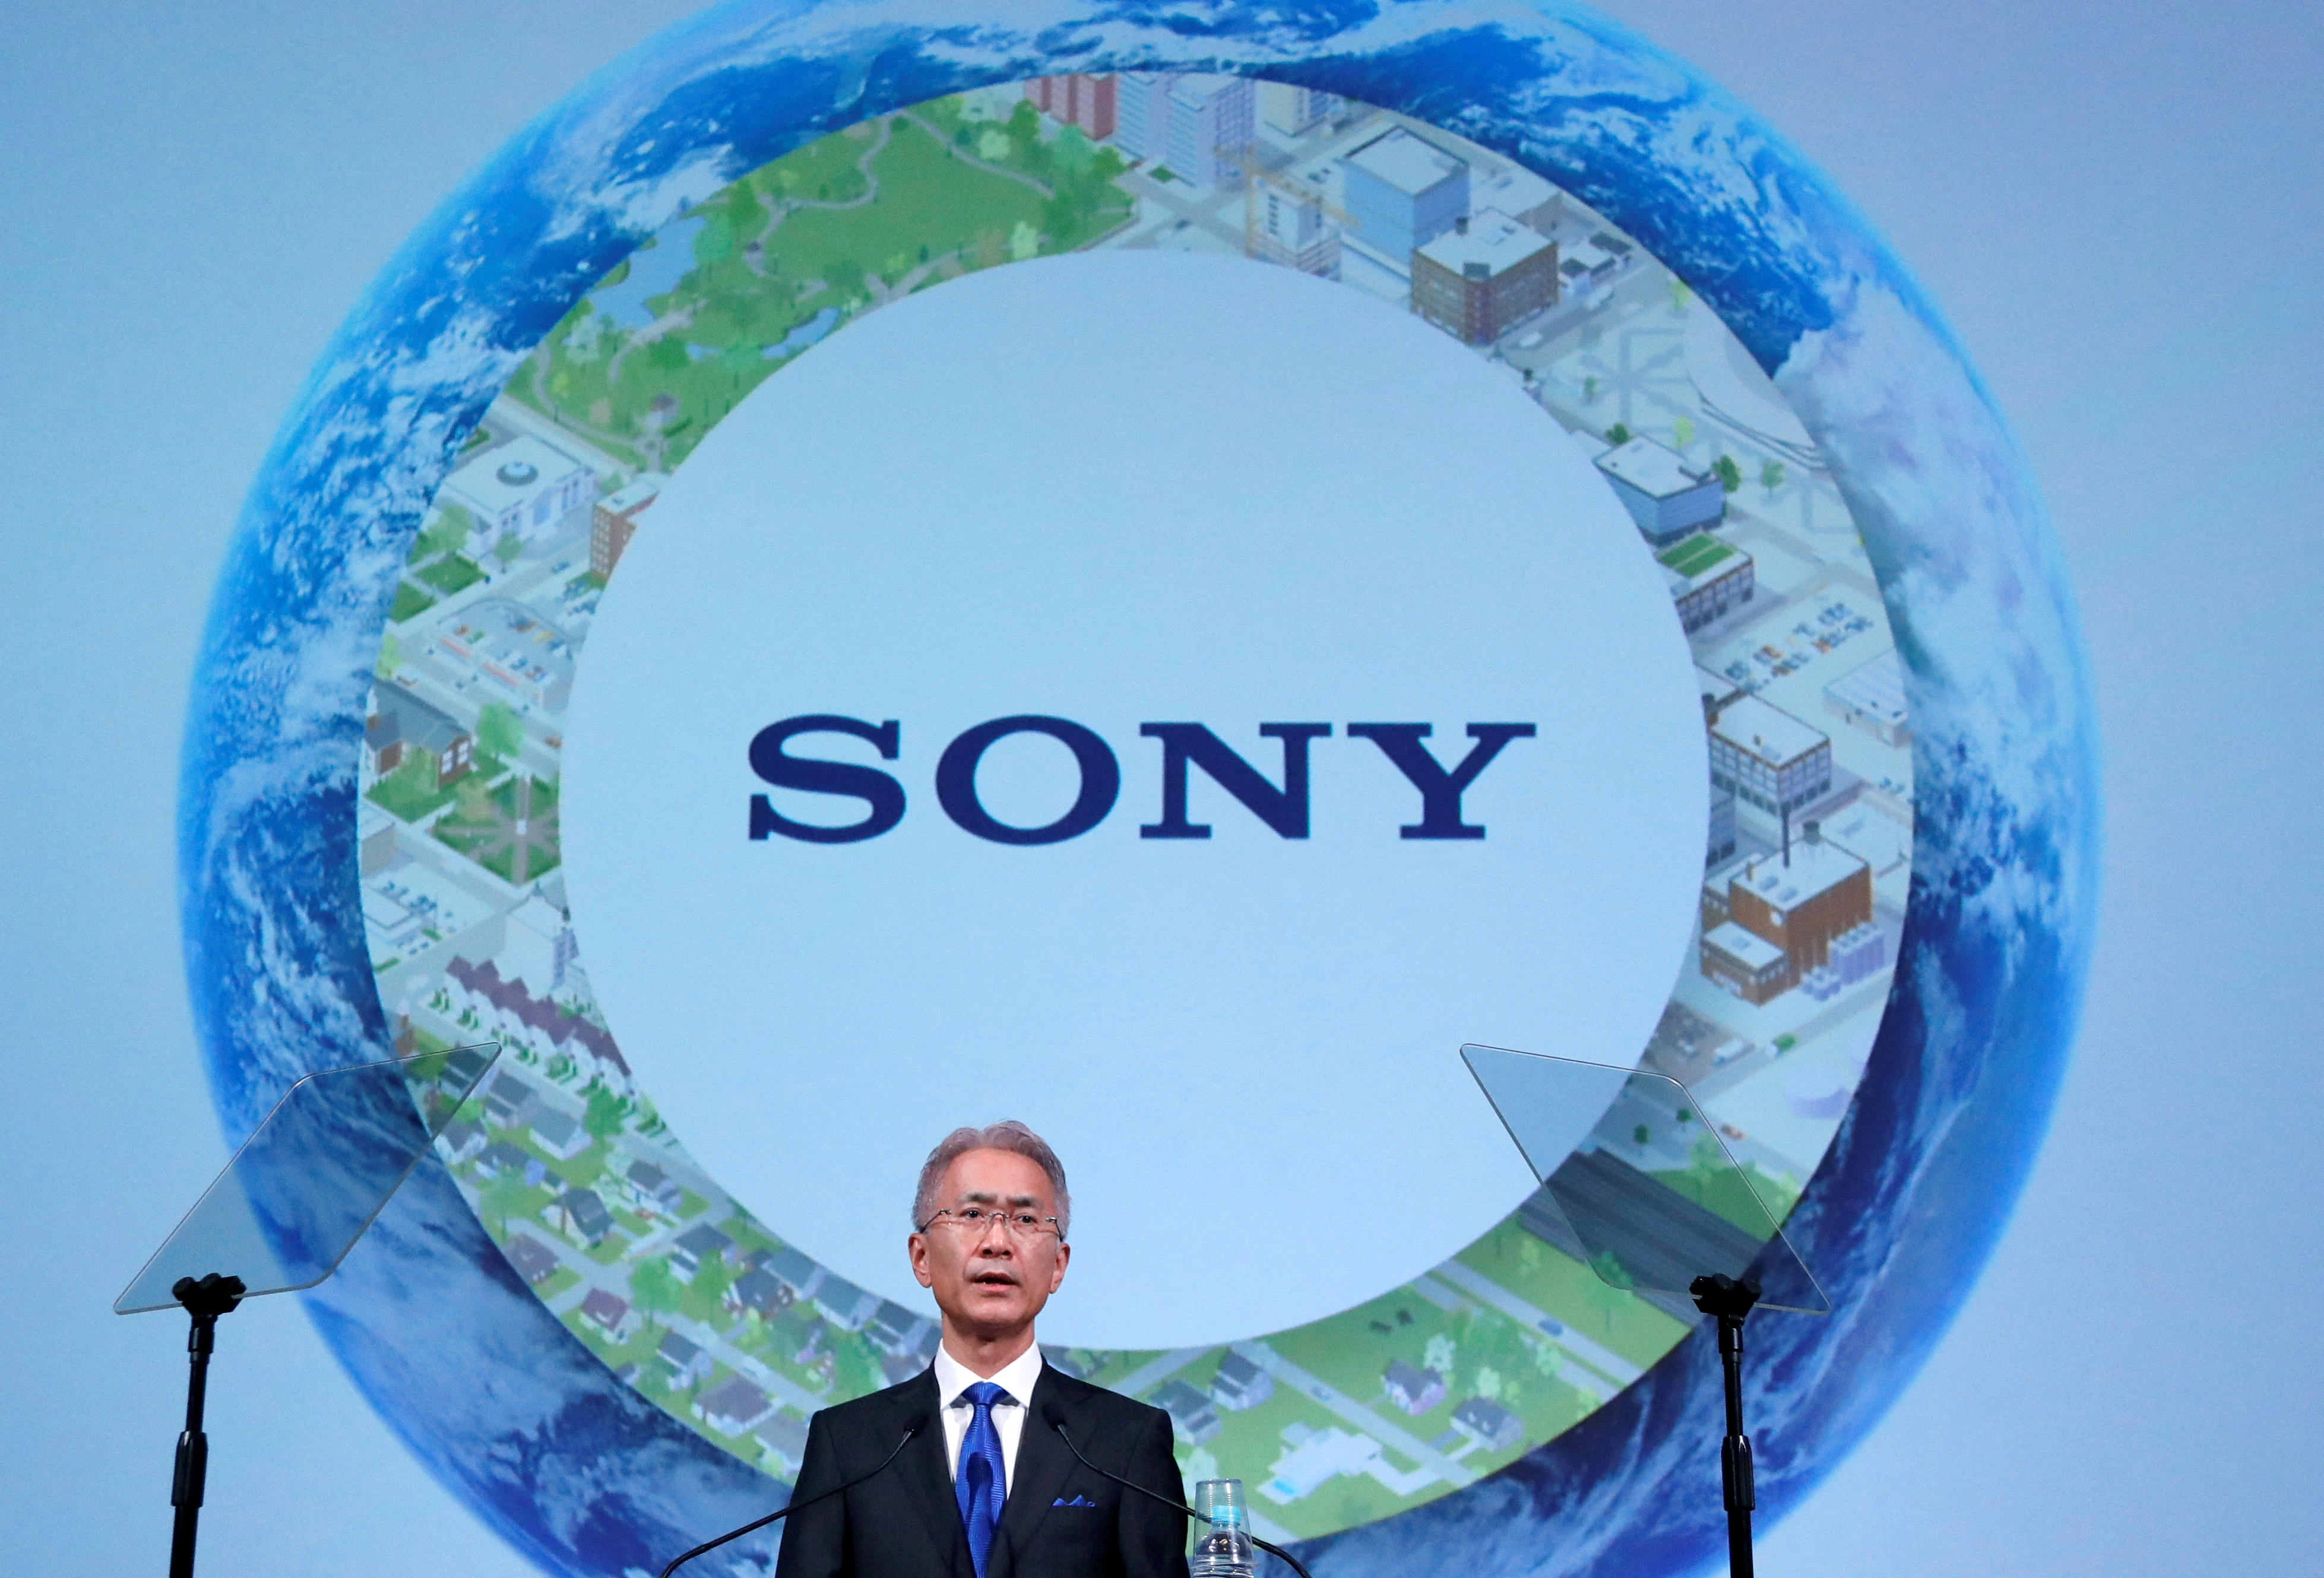 Sony Corp's President and CEO Yoshida attends a news conference at the company's headquarters in Tokyo